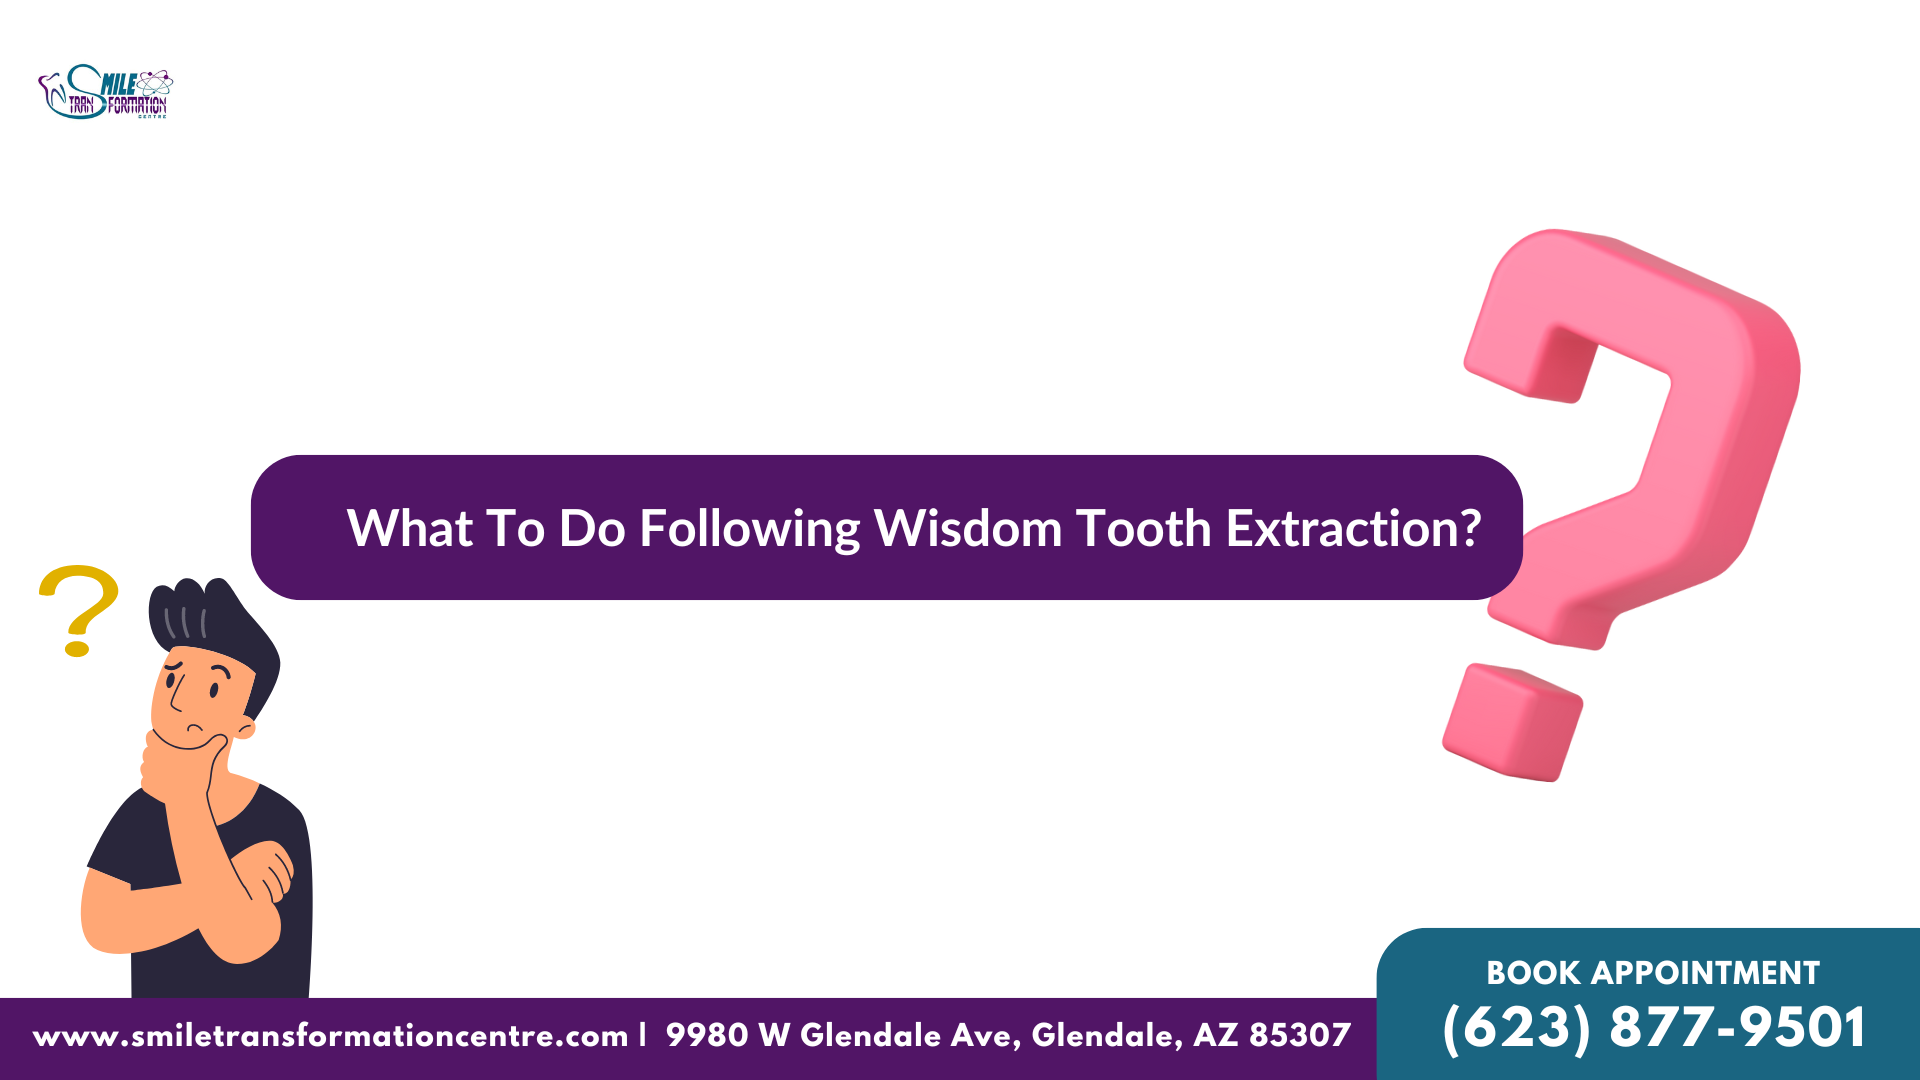 What To Do Following Wisdom Tooth Extraction